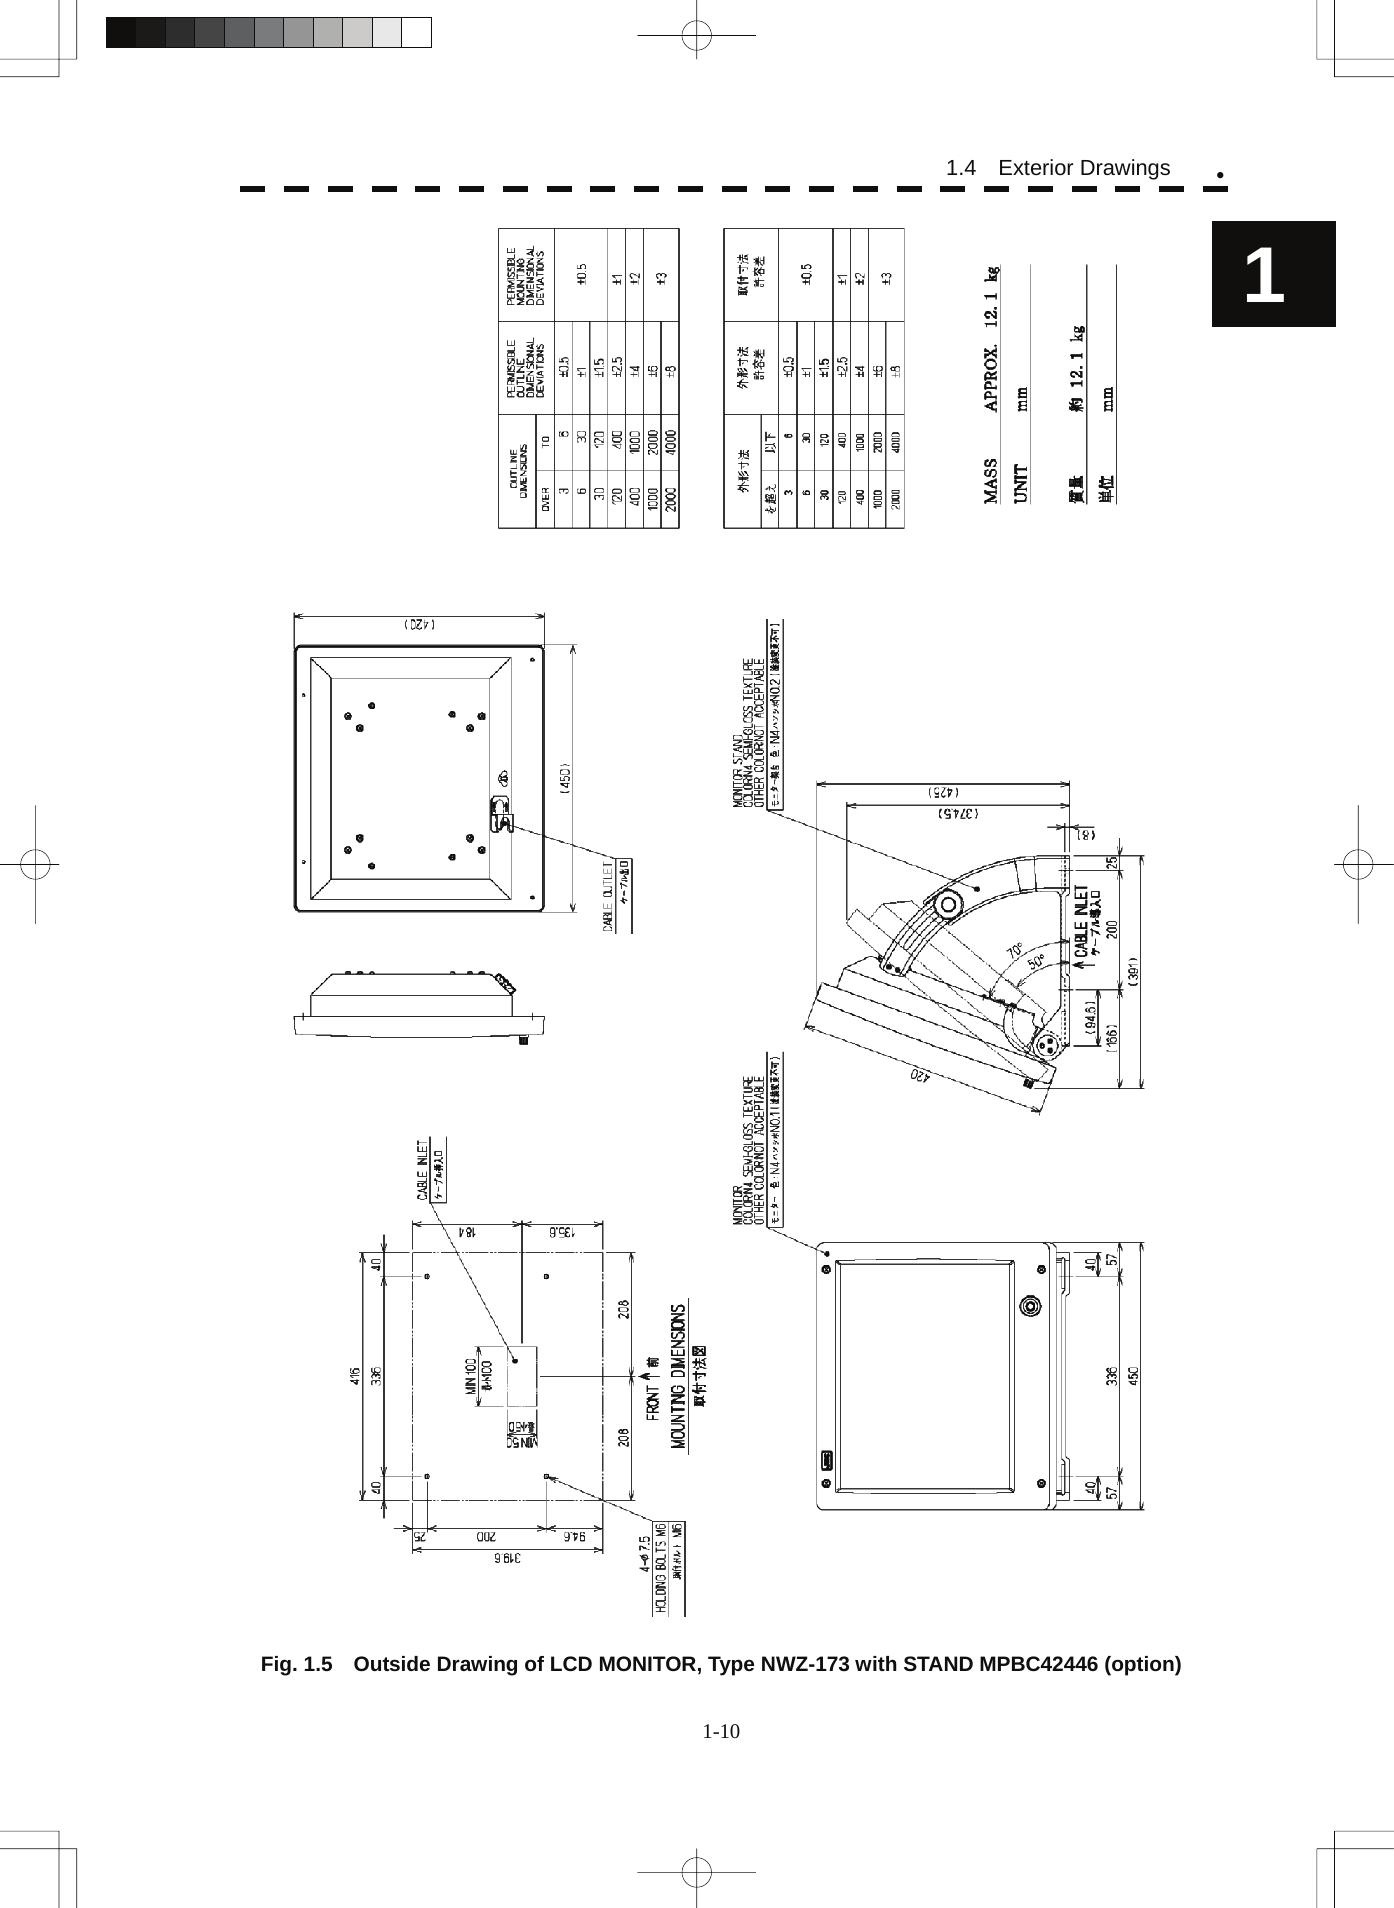  1-10 1.4  Exterior Drawings y1   Fig. 1.5    Outside Drawing of LCD MONITOR, Type NWZ-173 with STAND MPBC42446 (option) 